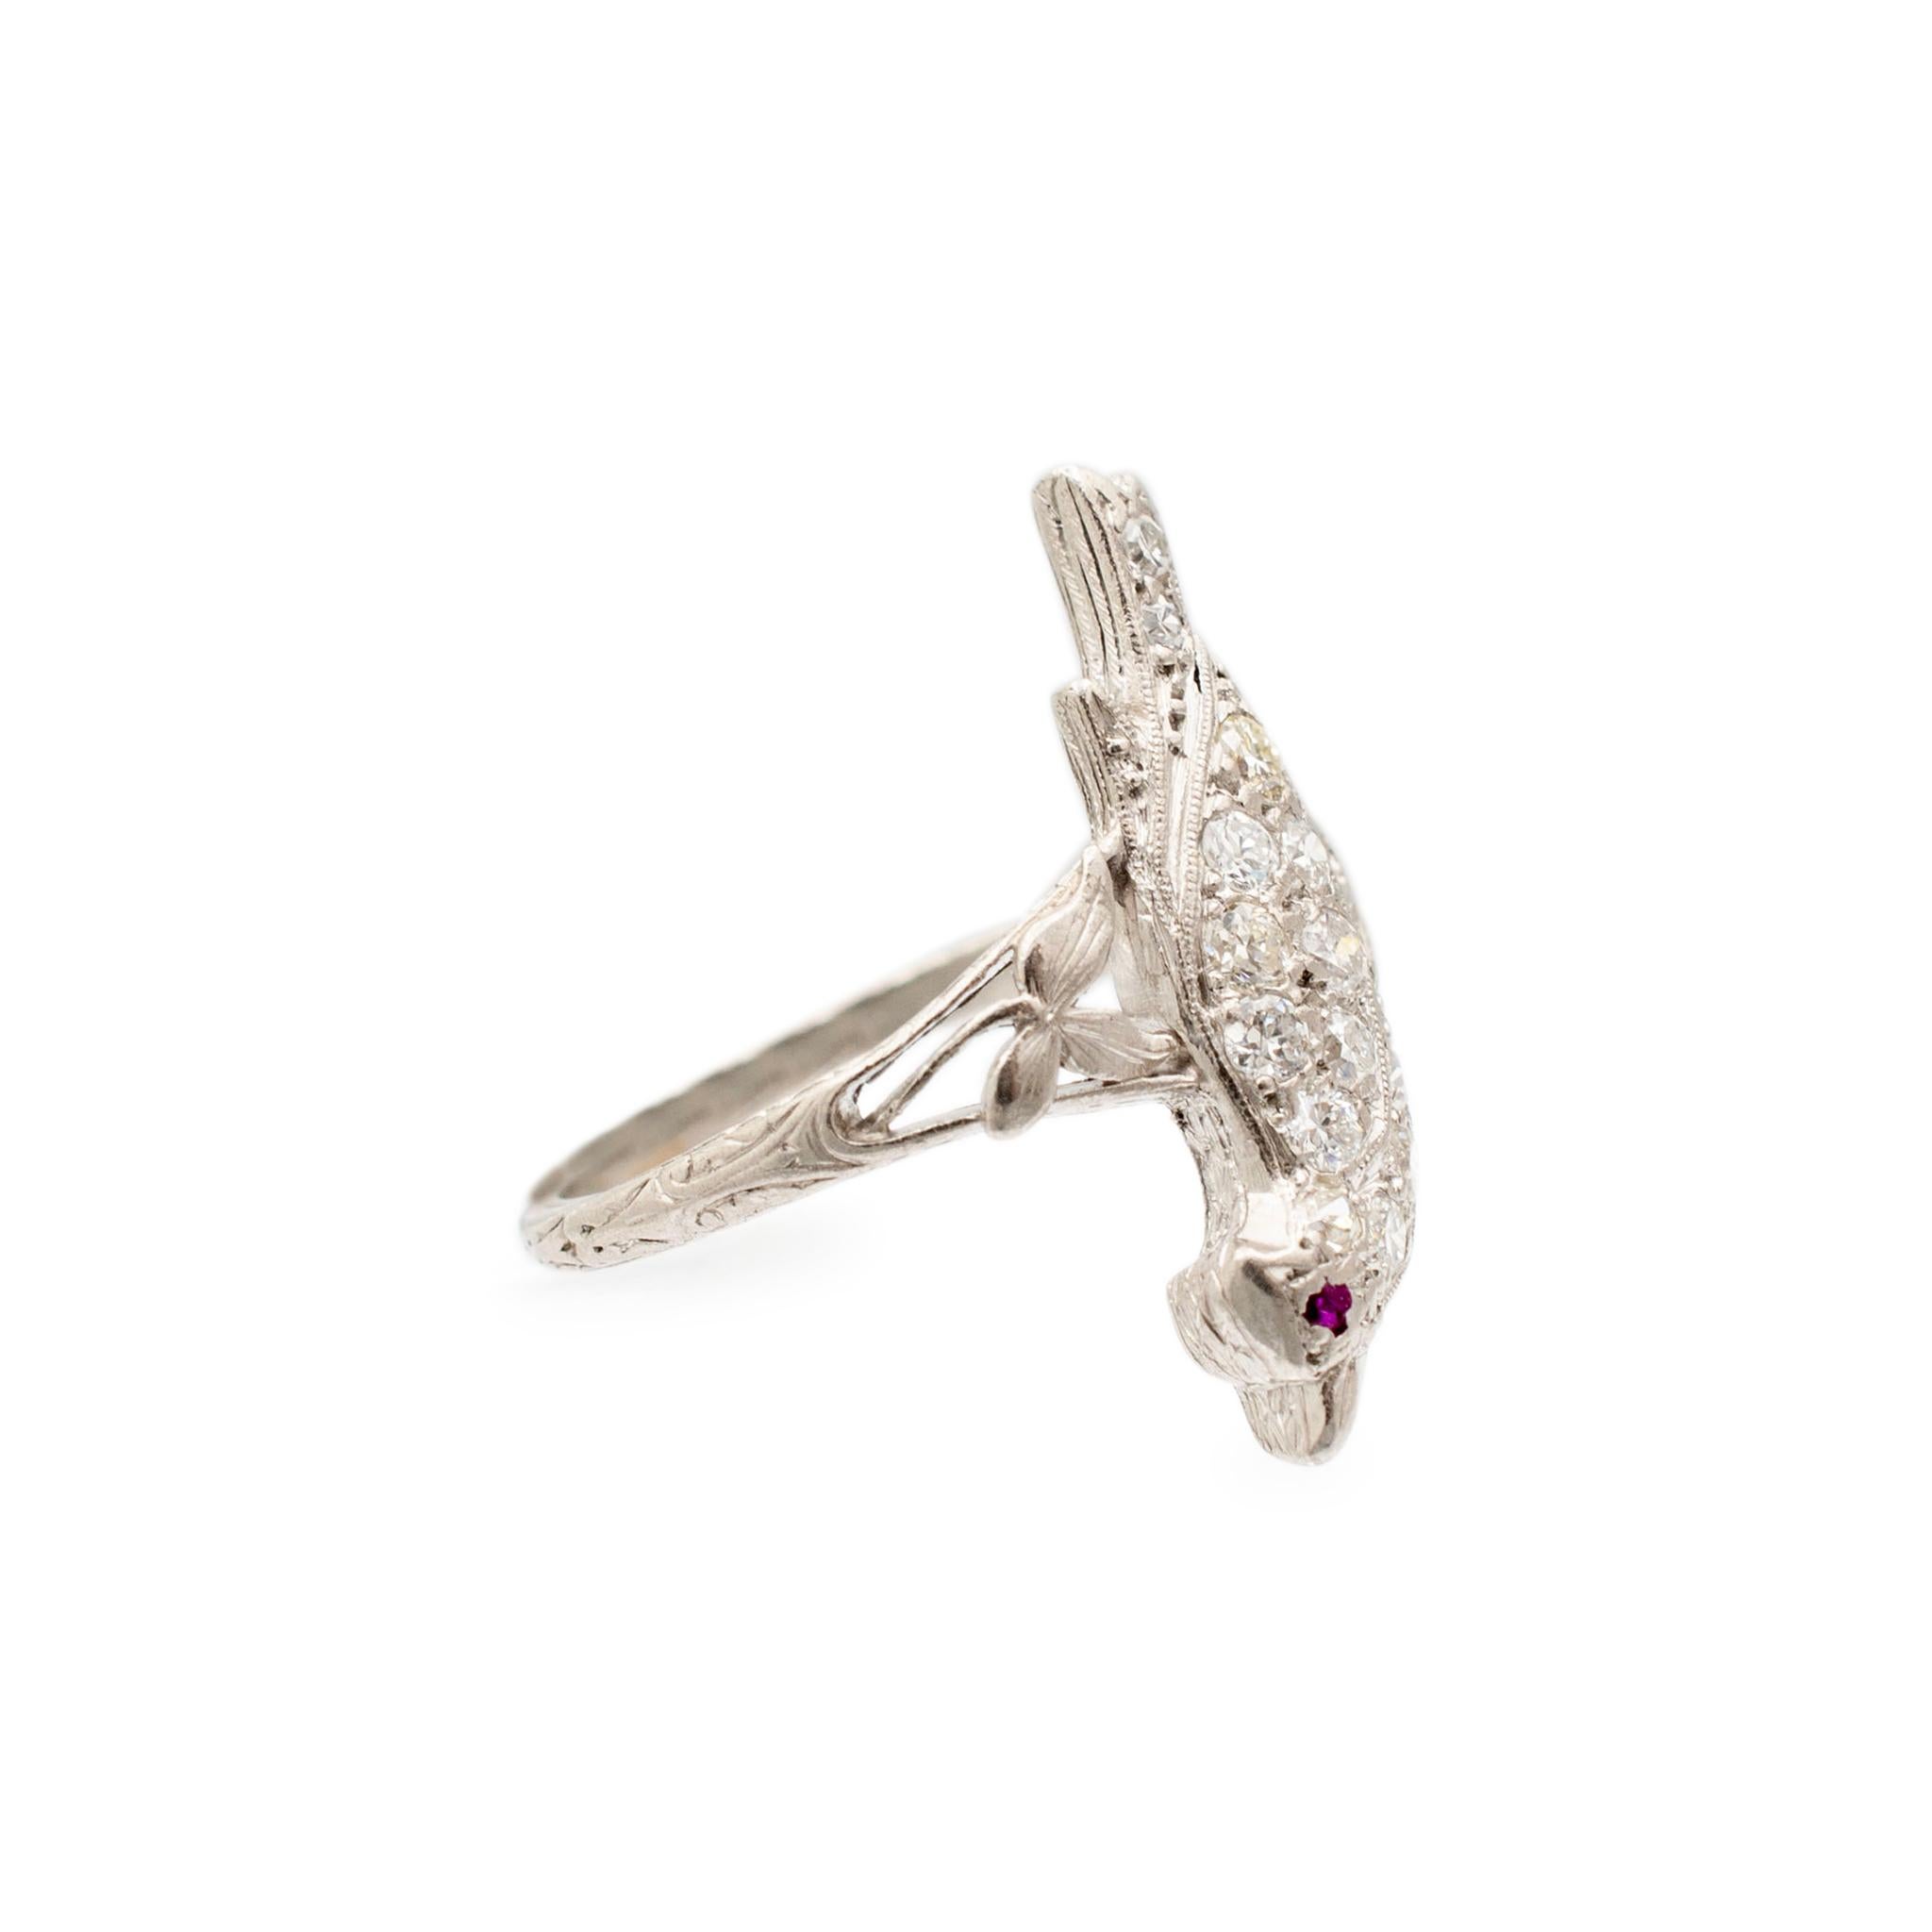 Ladies Antique Platinum Bird Diamond Ruby Cocktail Ring In Excellent Condition For Sale In Houston, TX